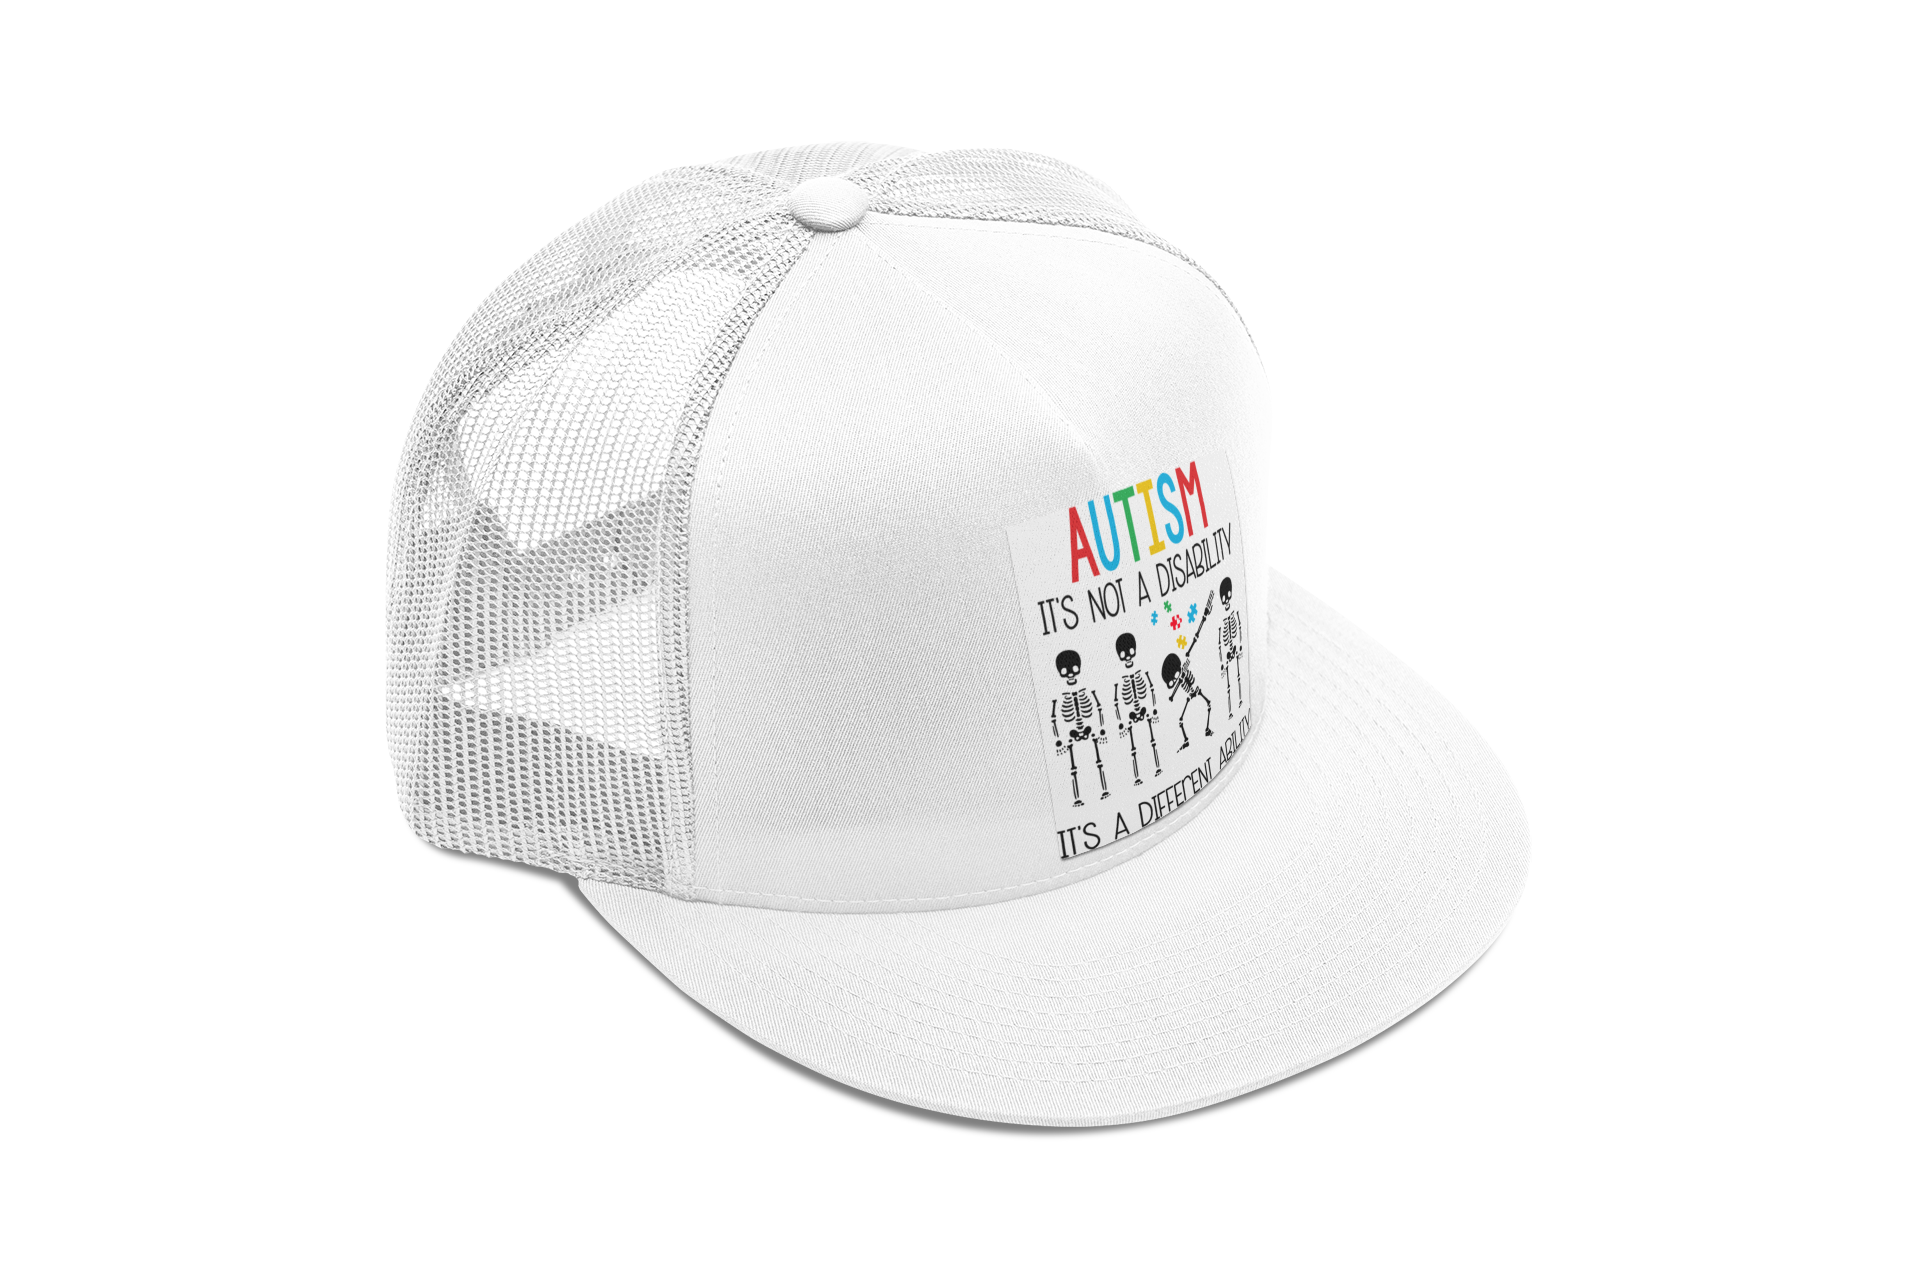 Gorra - Sonrisas a Full Color for Autism¨ - It´s Not a Disability is a Different Ability